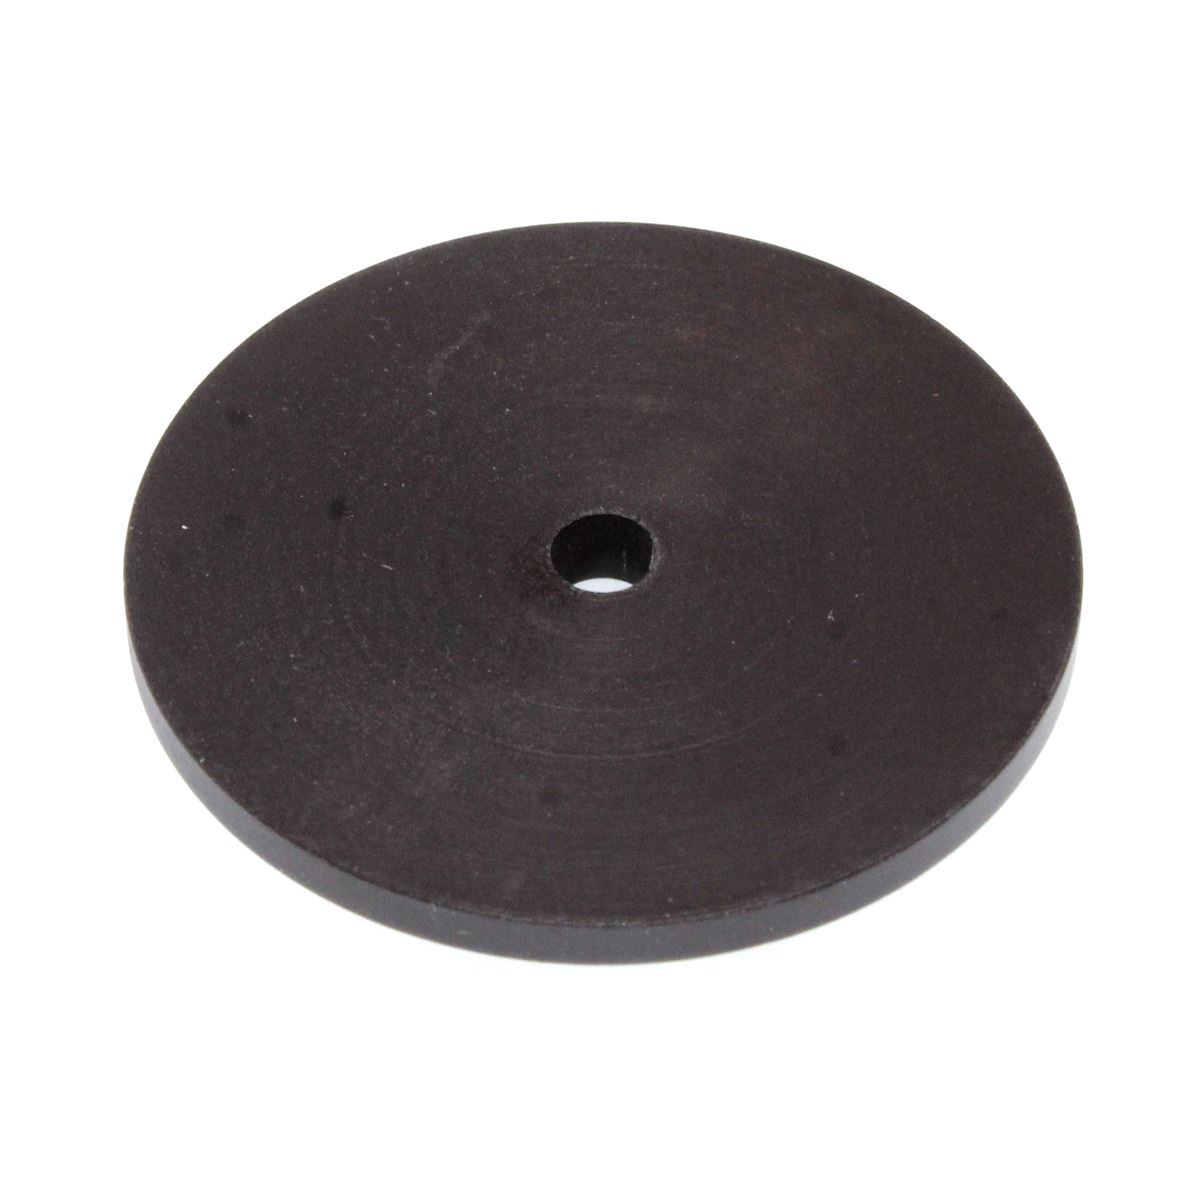 Schaub And Company 1 1/2" Solid Brass Knob Backplate Oil-Rubbed Bronze 710-10B